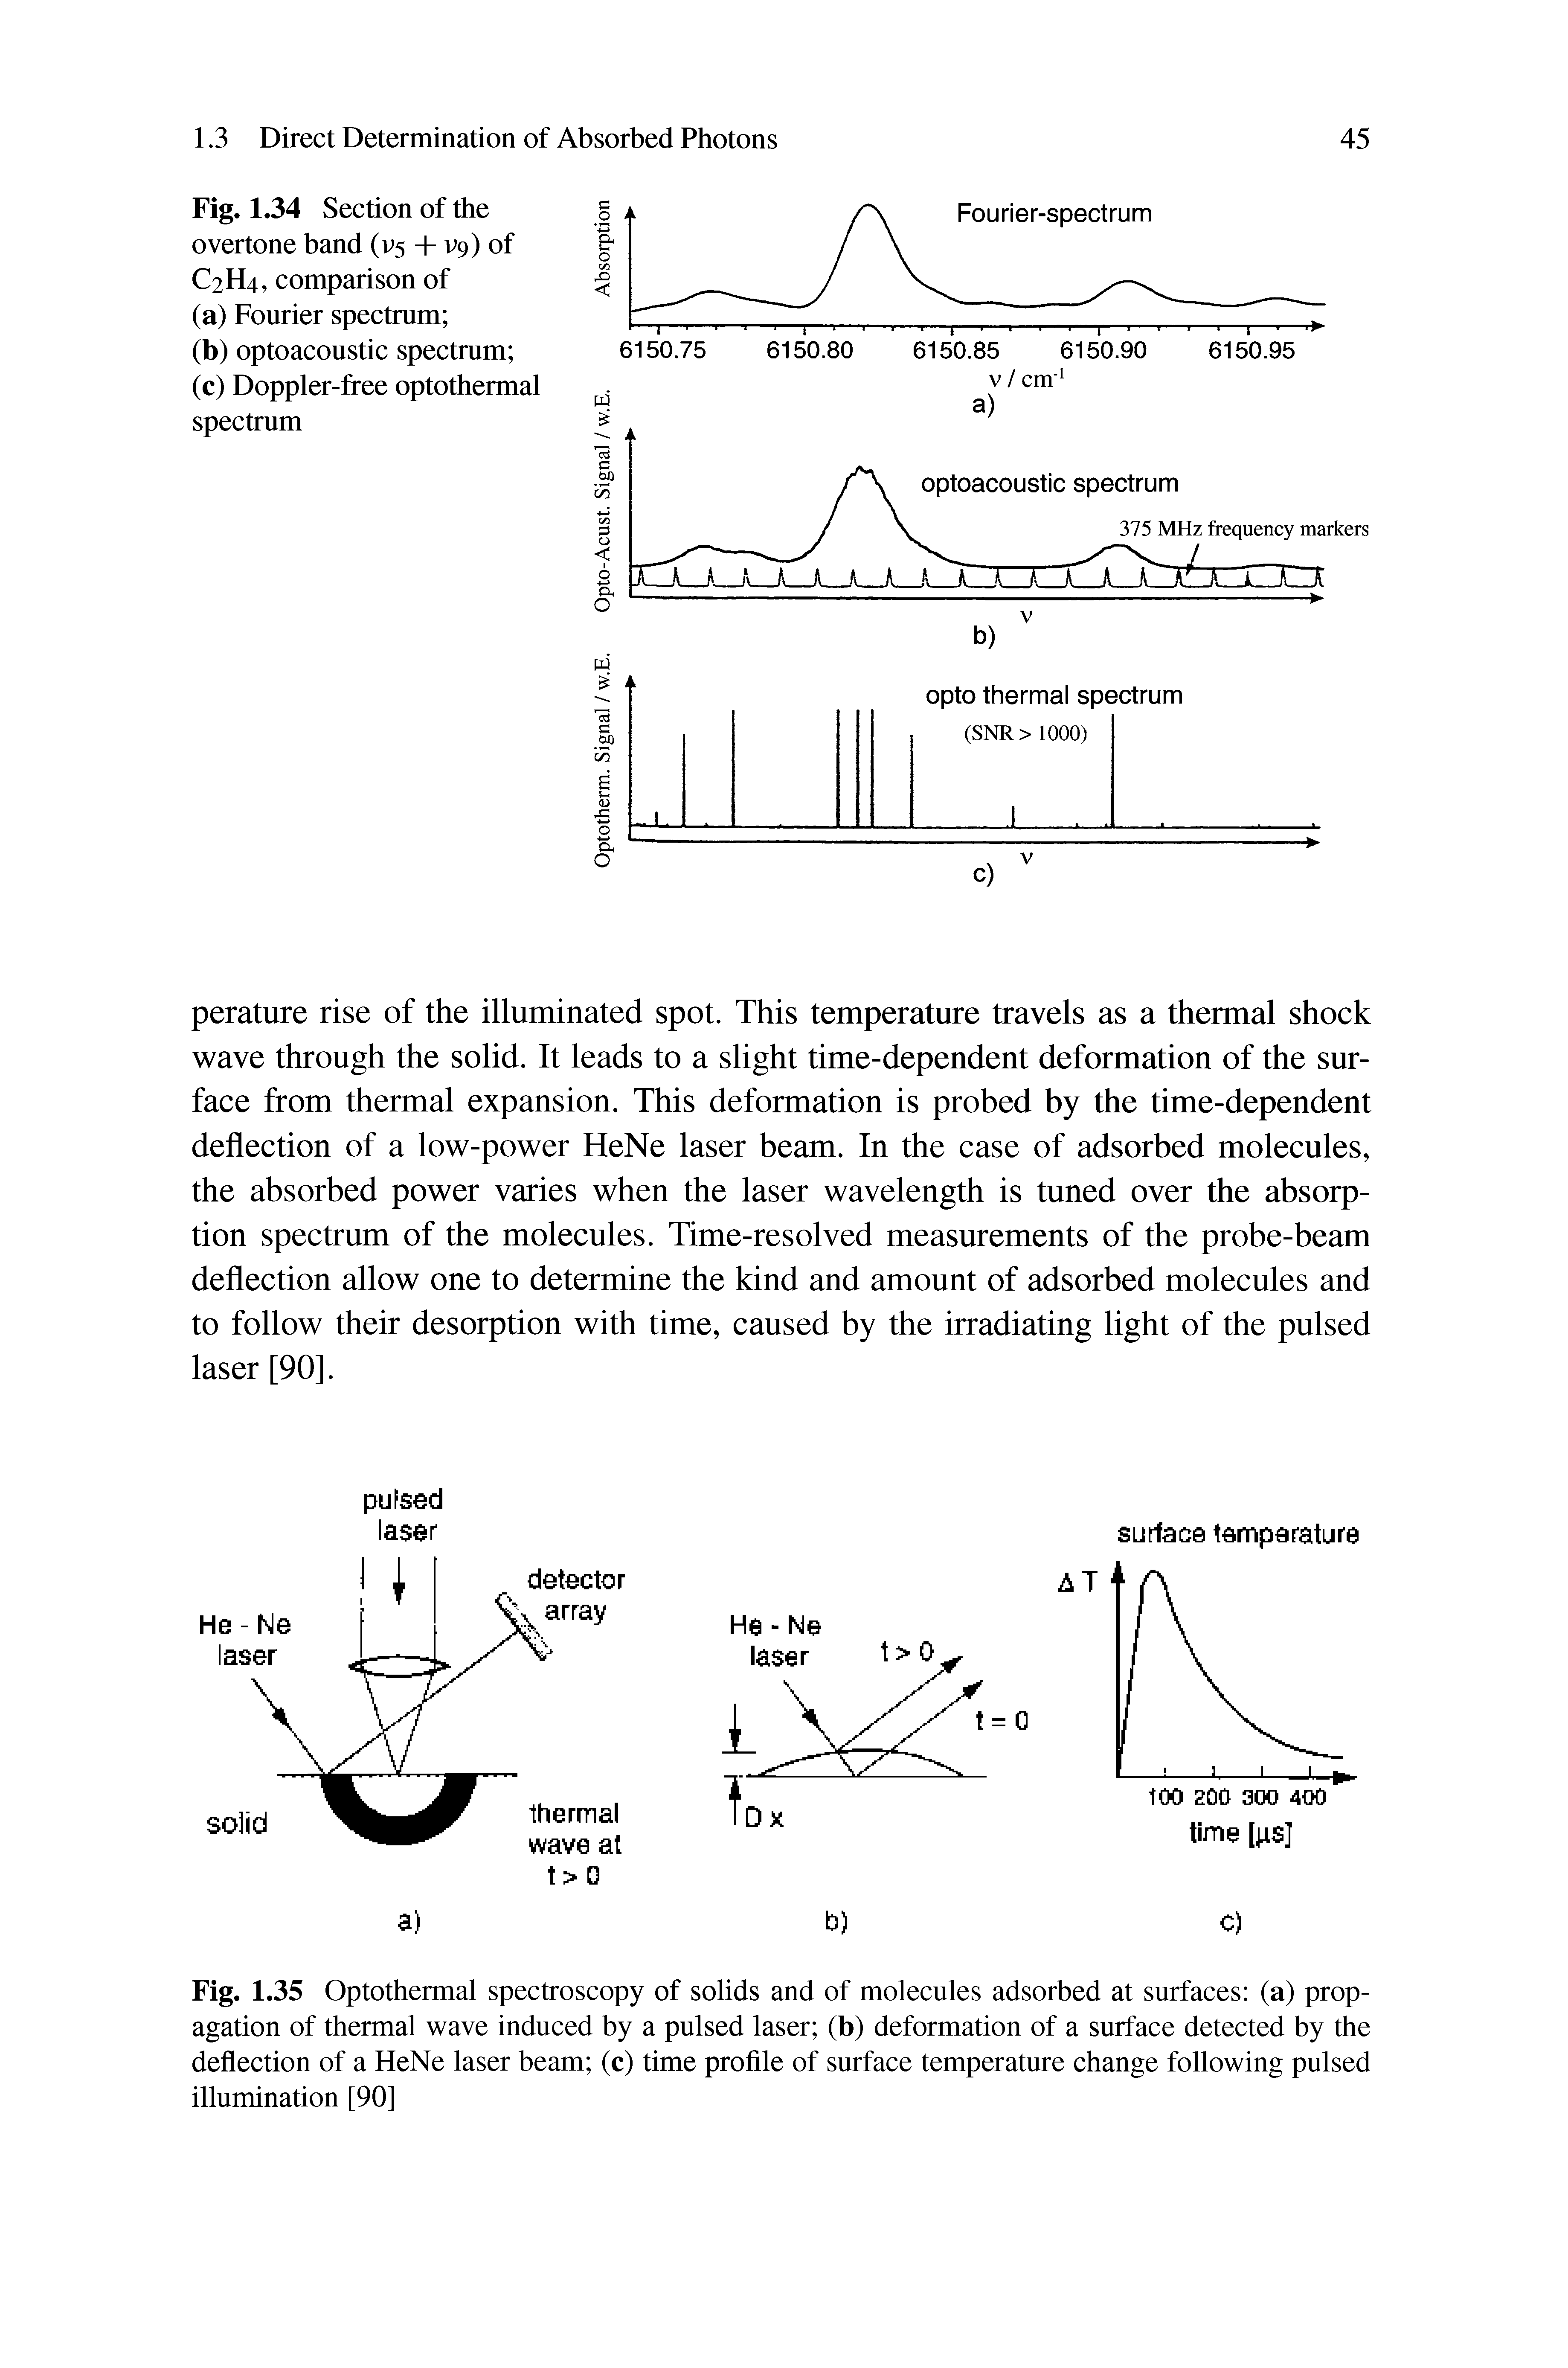 Fig. 1.35 Optothermal spectroscopy of solids and of molecules adsorbed at surfaces (a) propagation of thermal wave induced by a pulsed laser (b) deformation of a surface detected by the deflection of a HeNe laser beam (c) time profile of surface temperature change following pulsed illumination [90]...